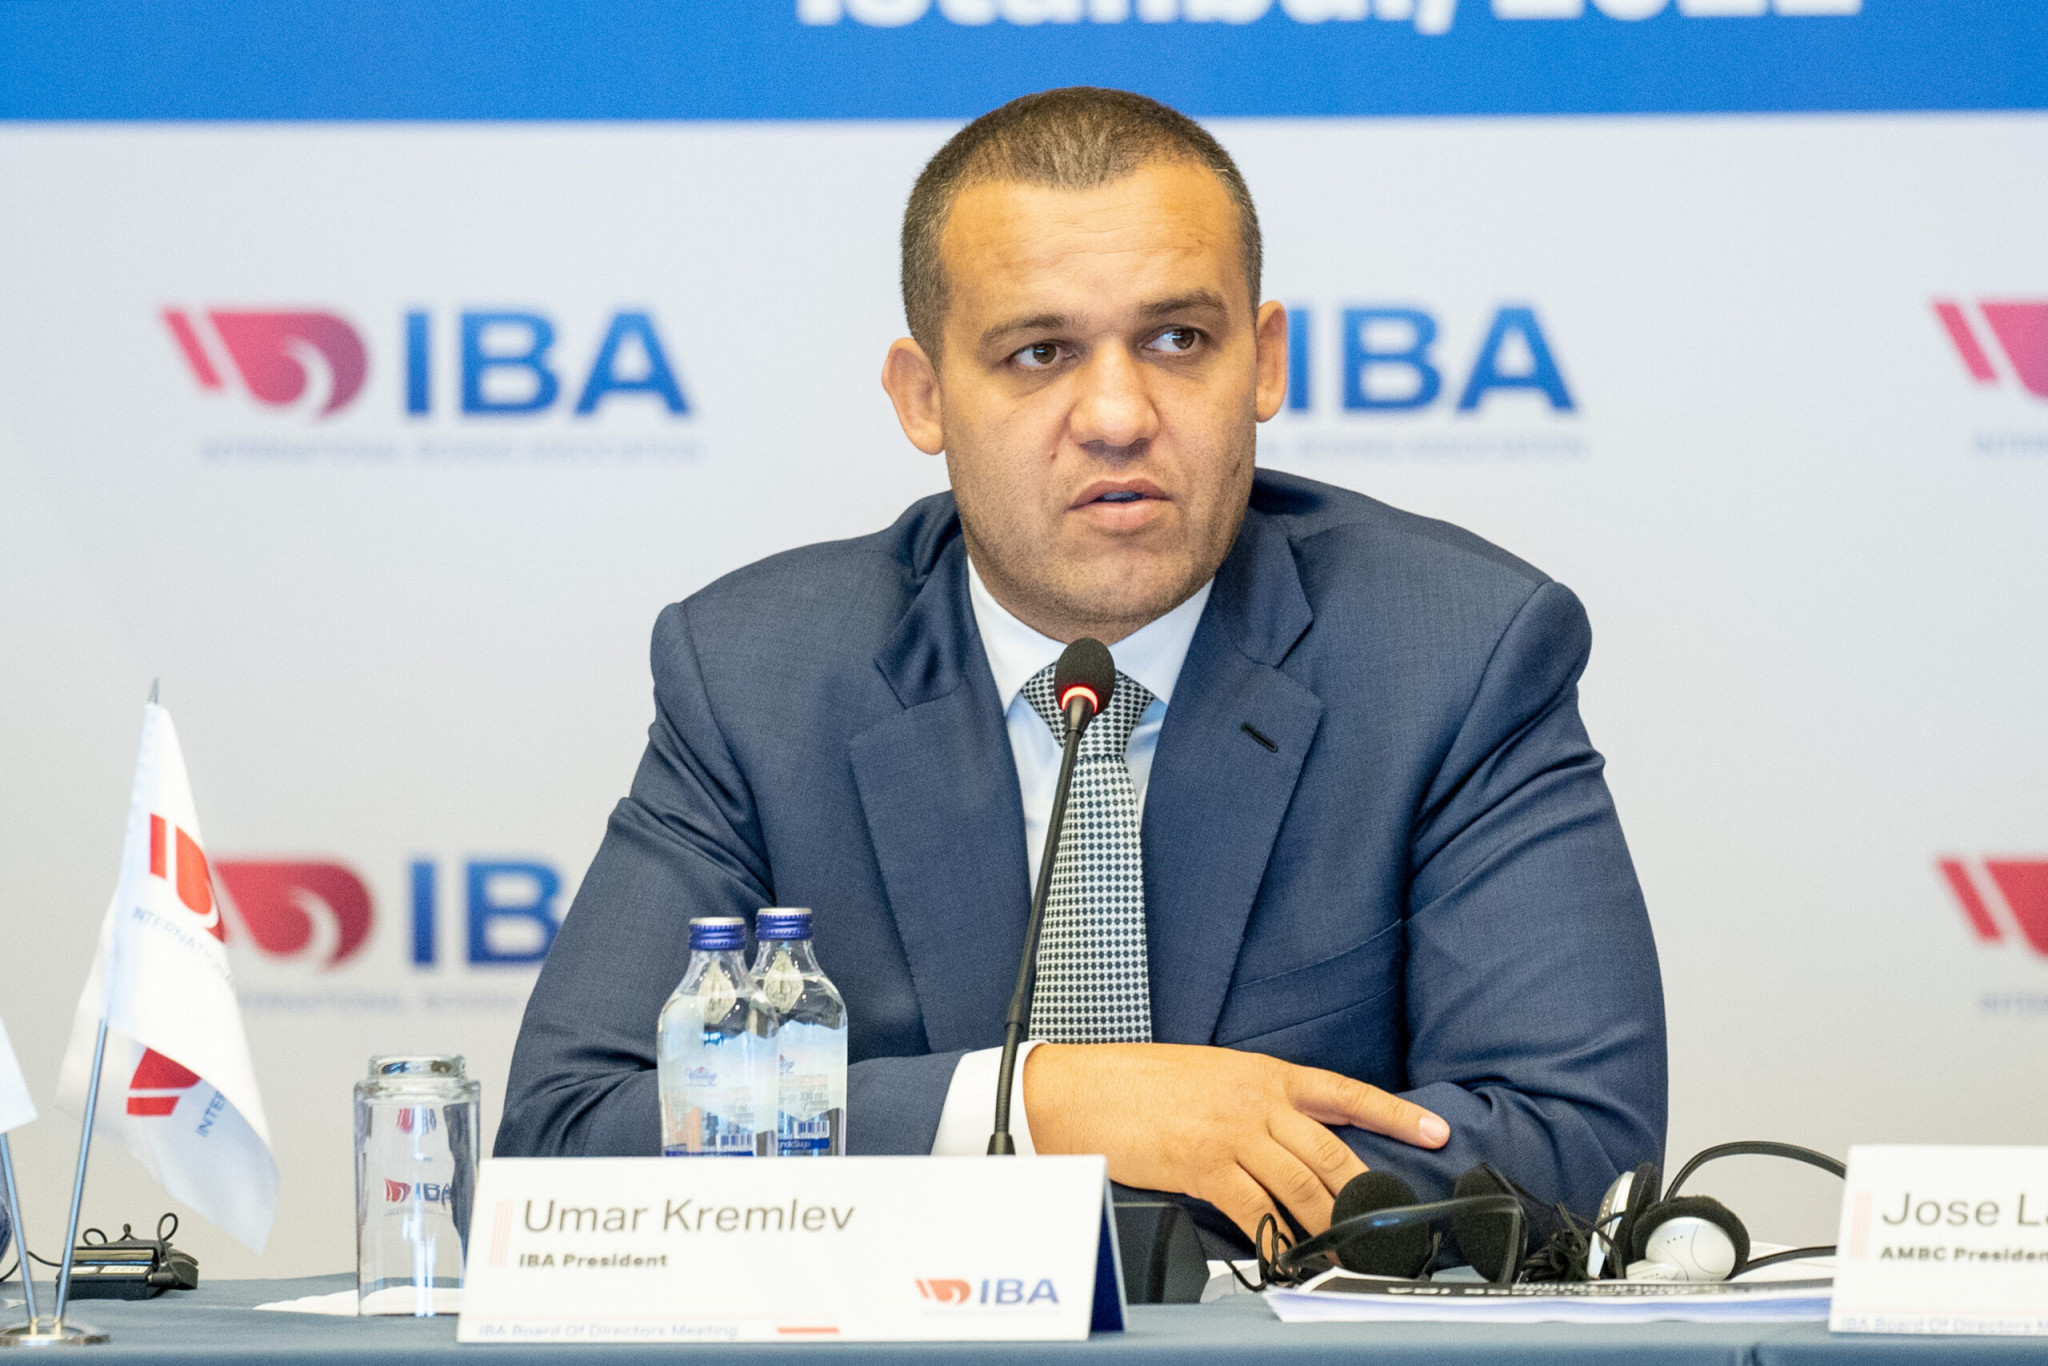 Kremlev receives backing as IBA President from several nations, plus claims no election necessary